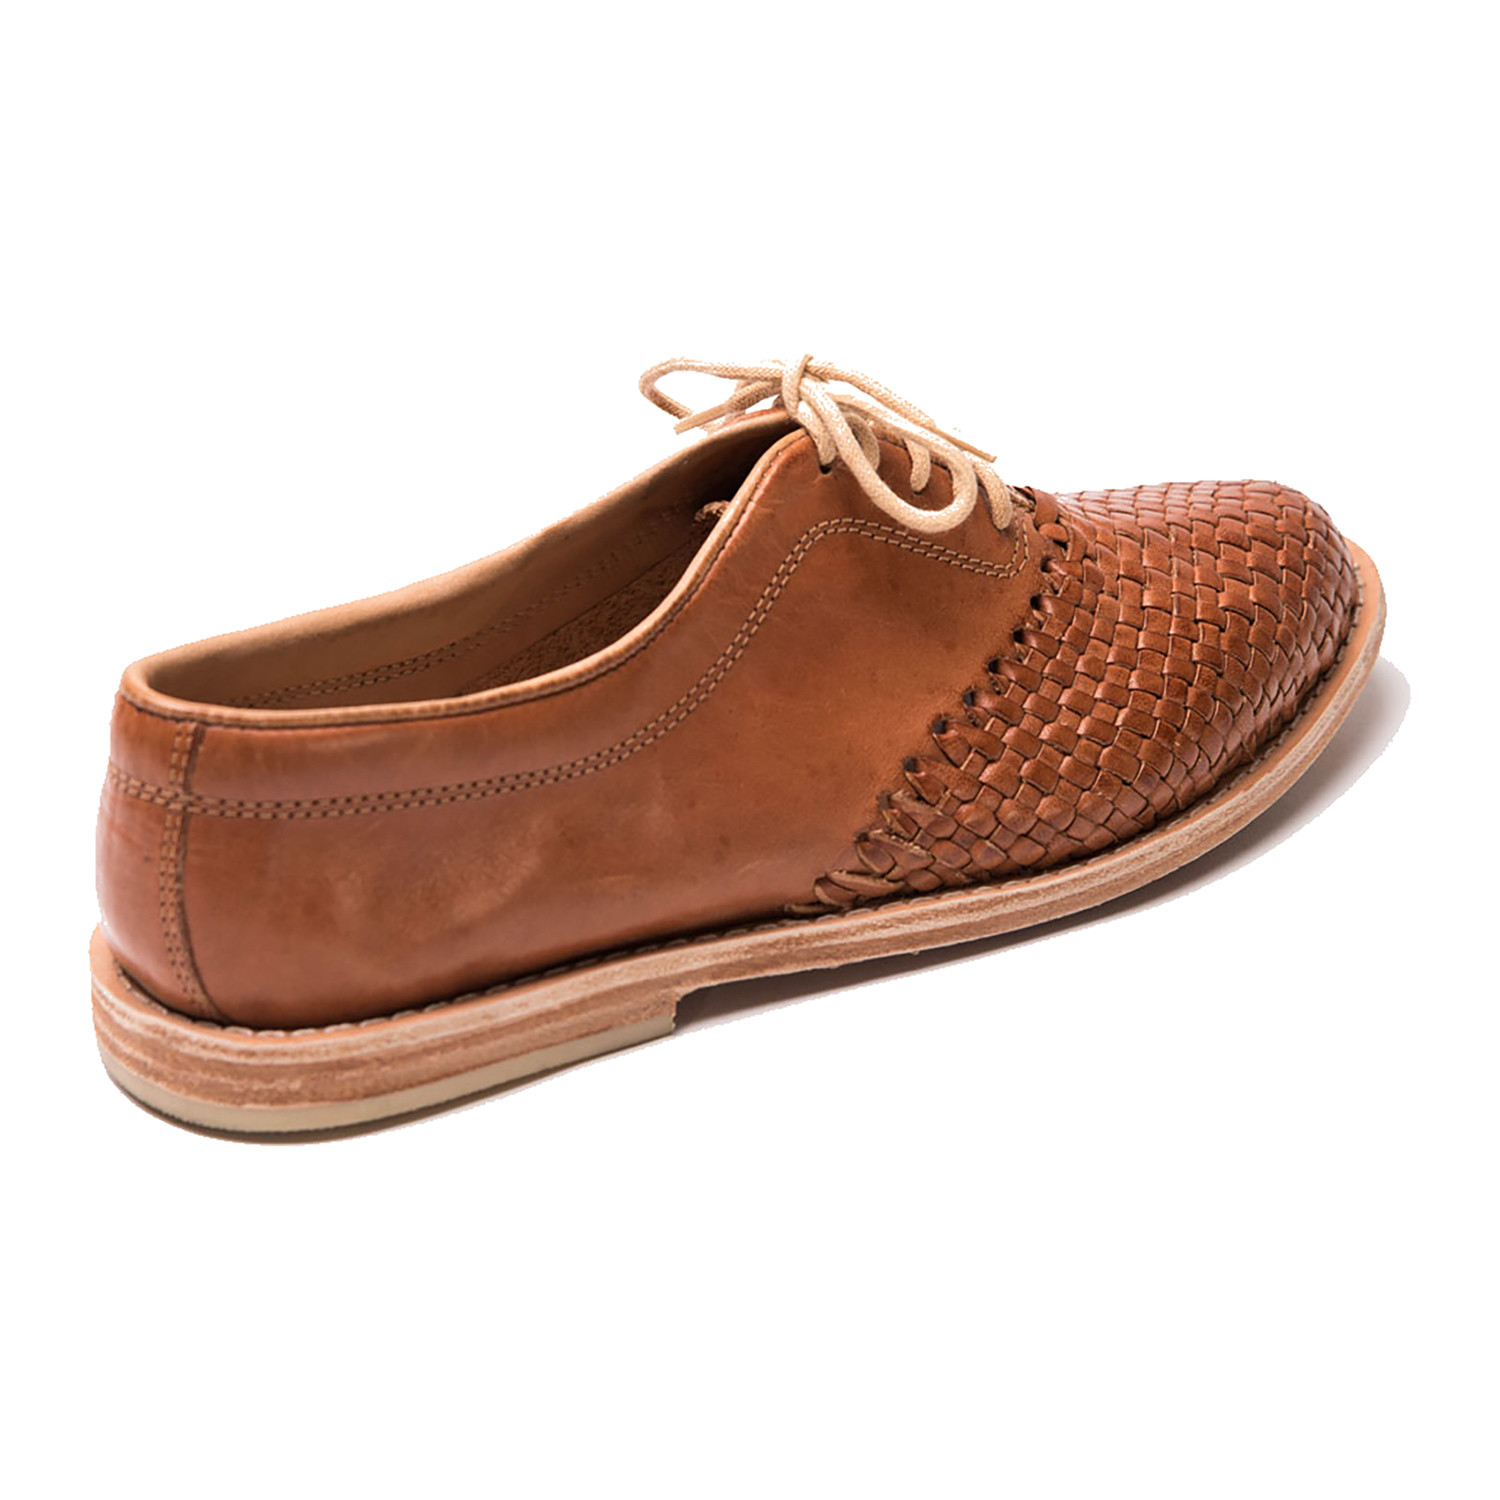 Hidalgo // Caballero Brown (US: 10.5) - The Cano Shoe - Touch of Modern